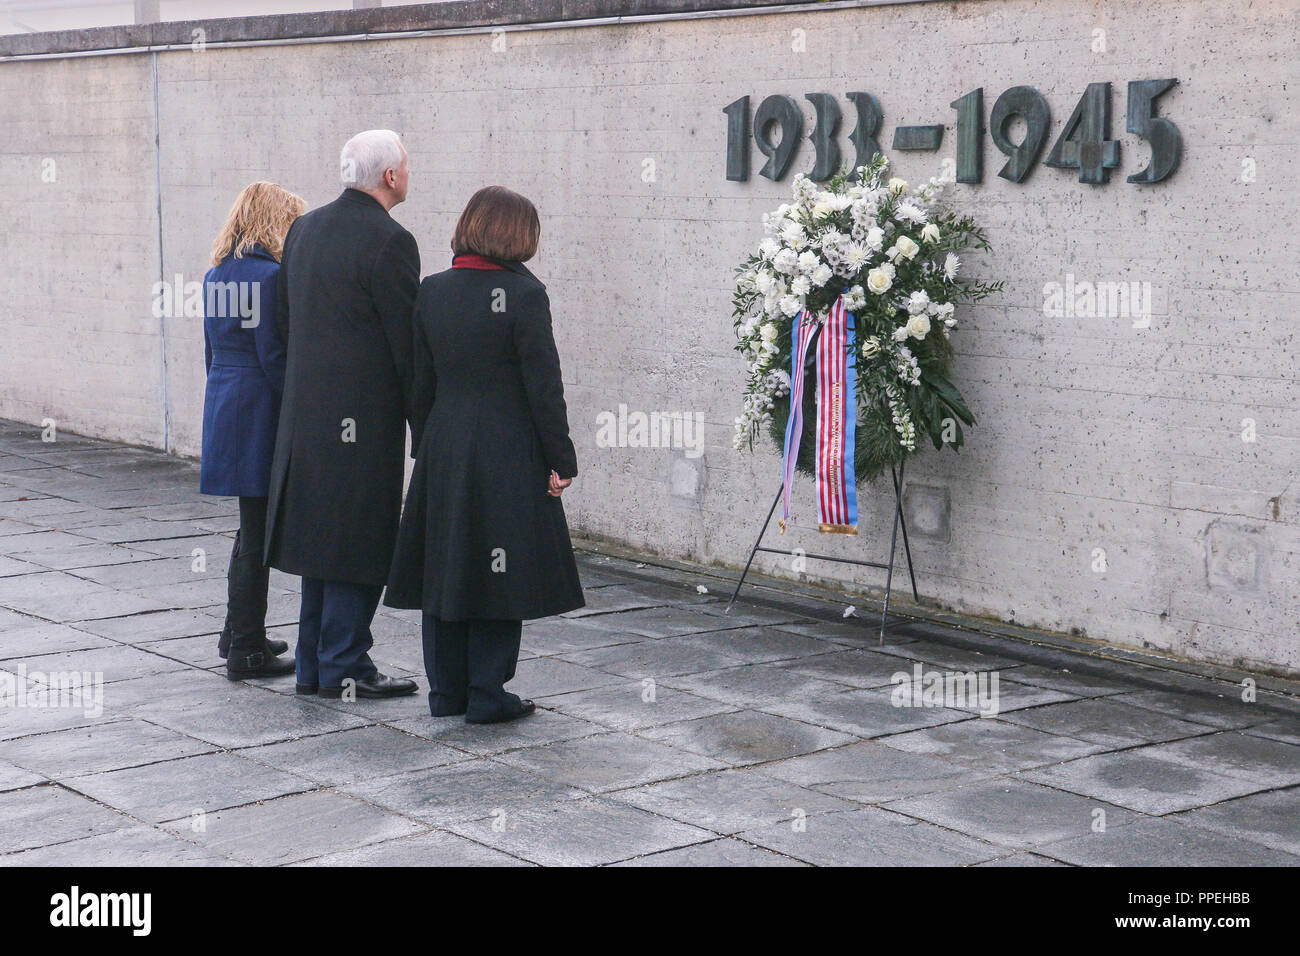 The US Vice-President Mike Pence and his family visit the Dachau Concentration Camp Memorial Site and lay a wreath at the memorial for the victims. Stock Photo